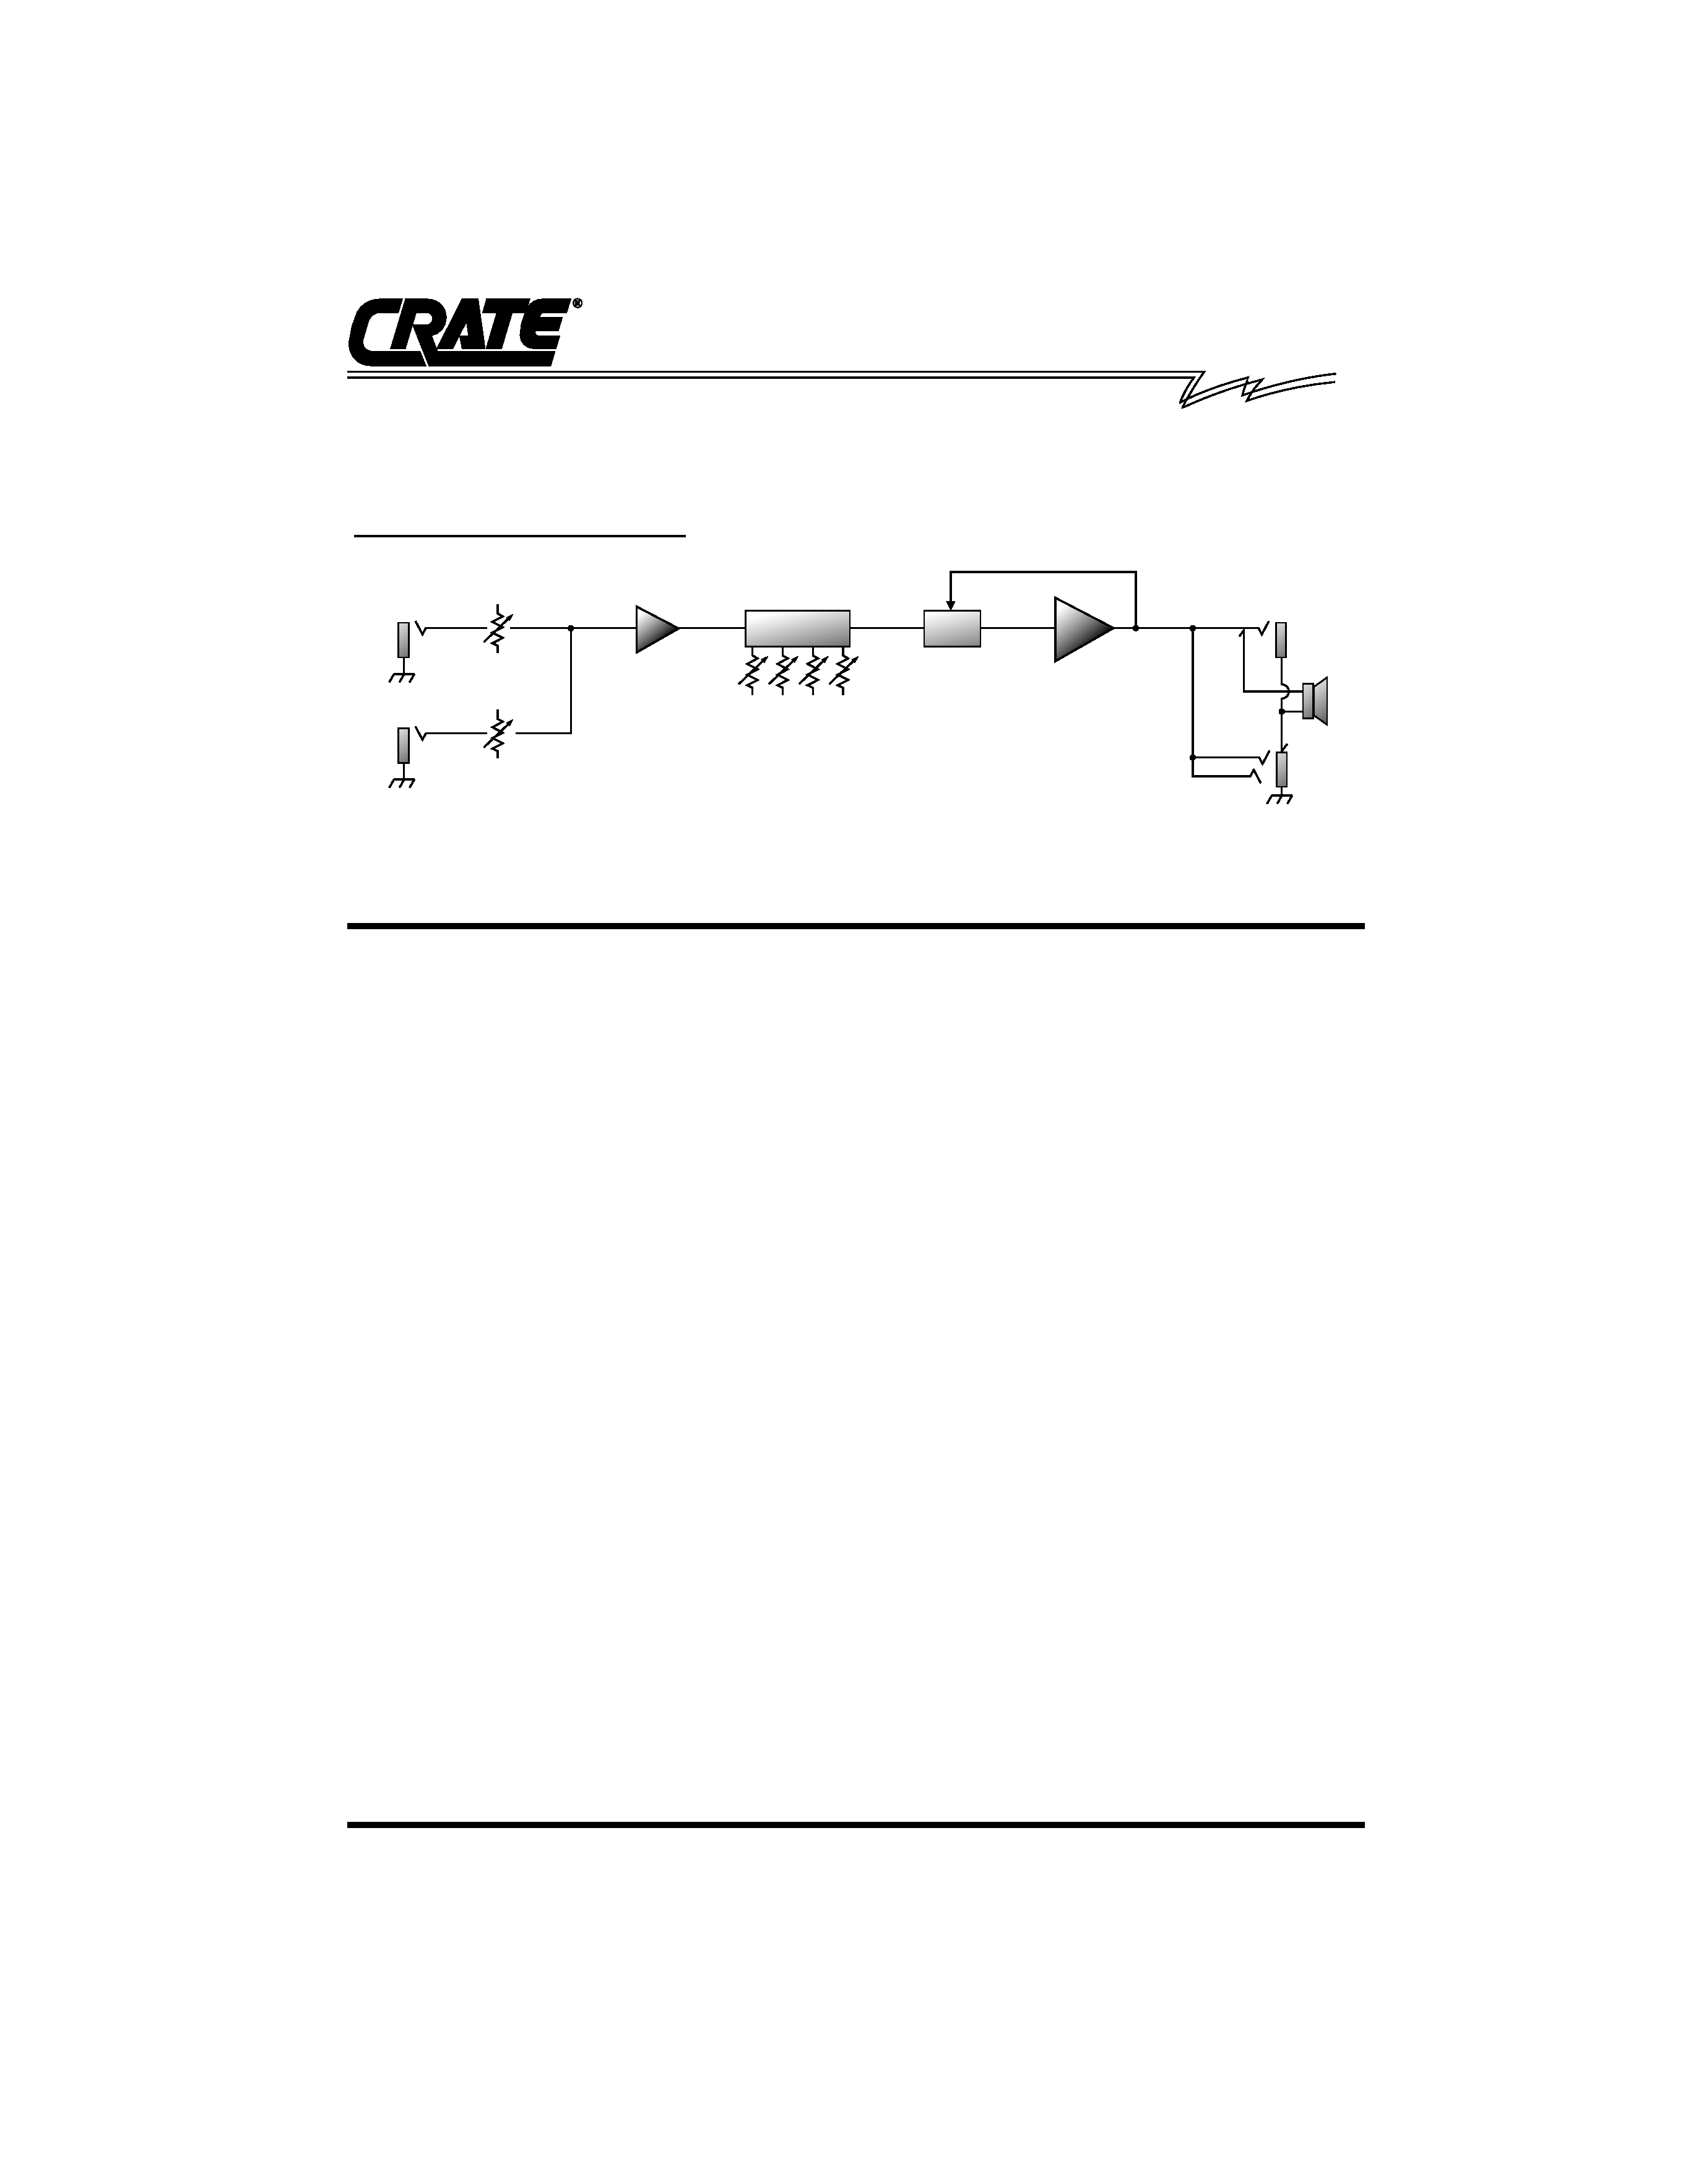 CRATE KX-15 - Owner's Manual Immediate Download